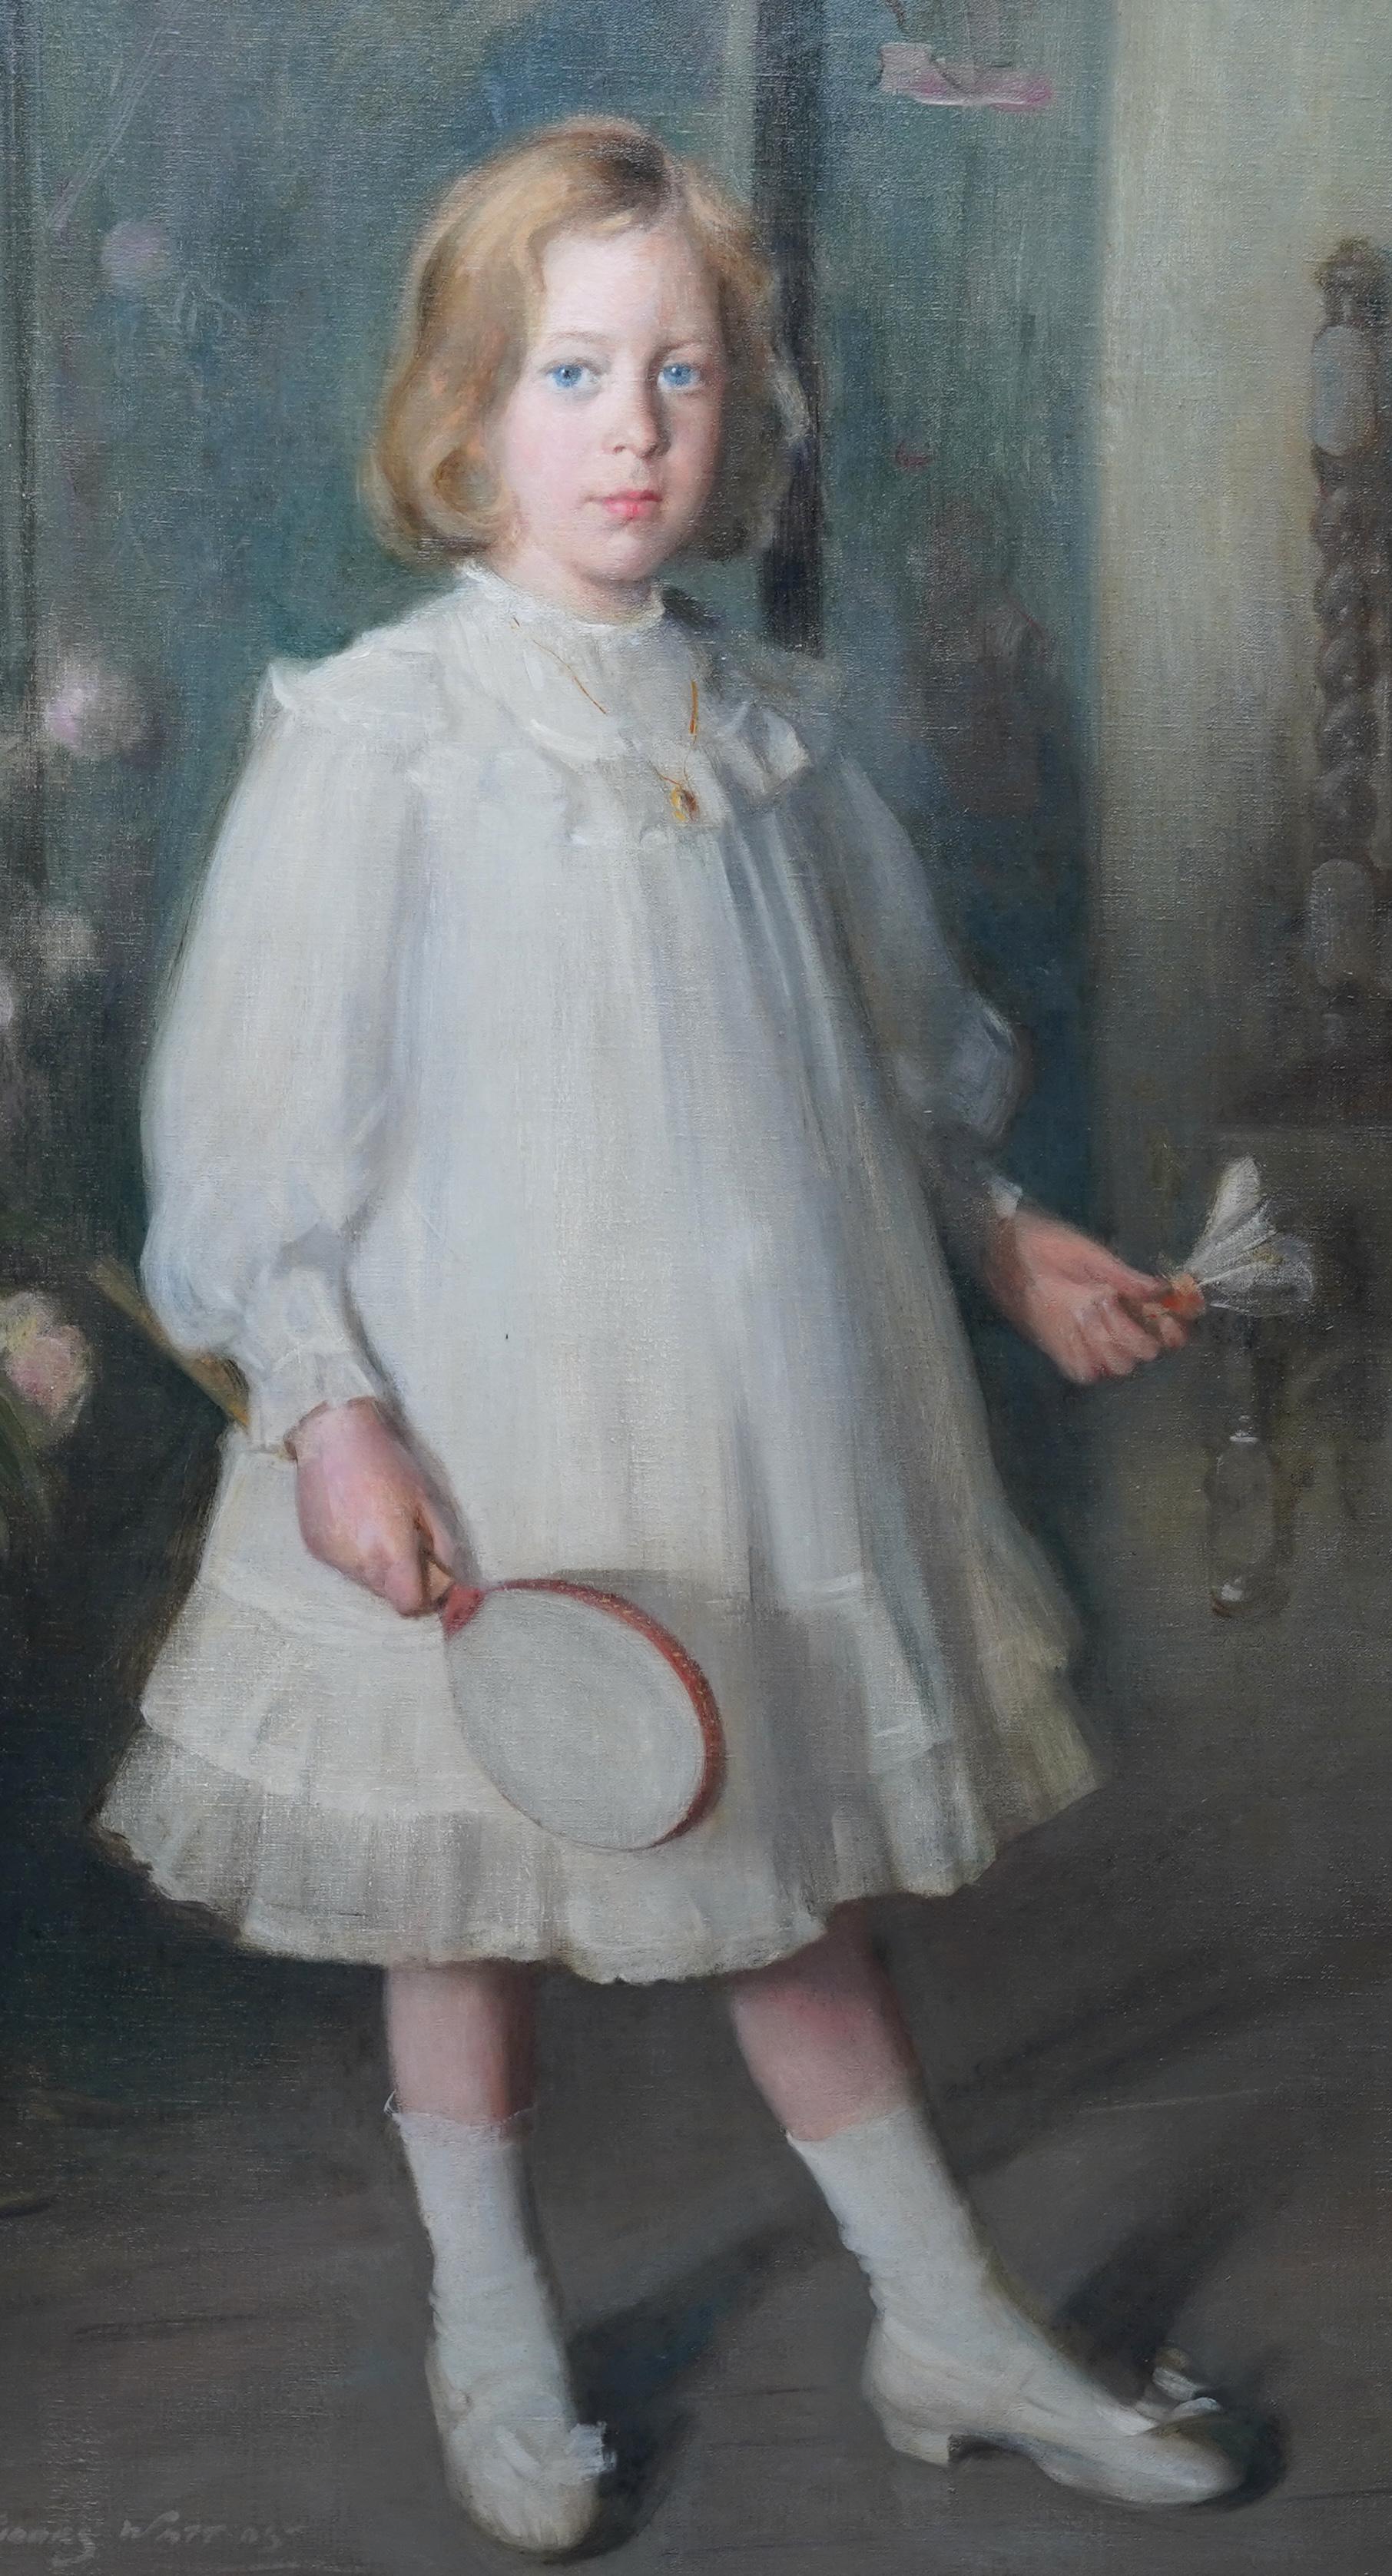 This charming Edwardian Scottish full length portrait oil painting is by noted Scottish portrait artist George Fiddes Watt. Painted circa 1910, the sitter is Muriel Sutherland, daughter of J B Sutherland. Muriel, aged about 9 years old, is stood in